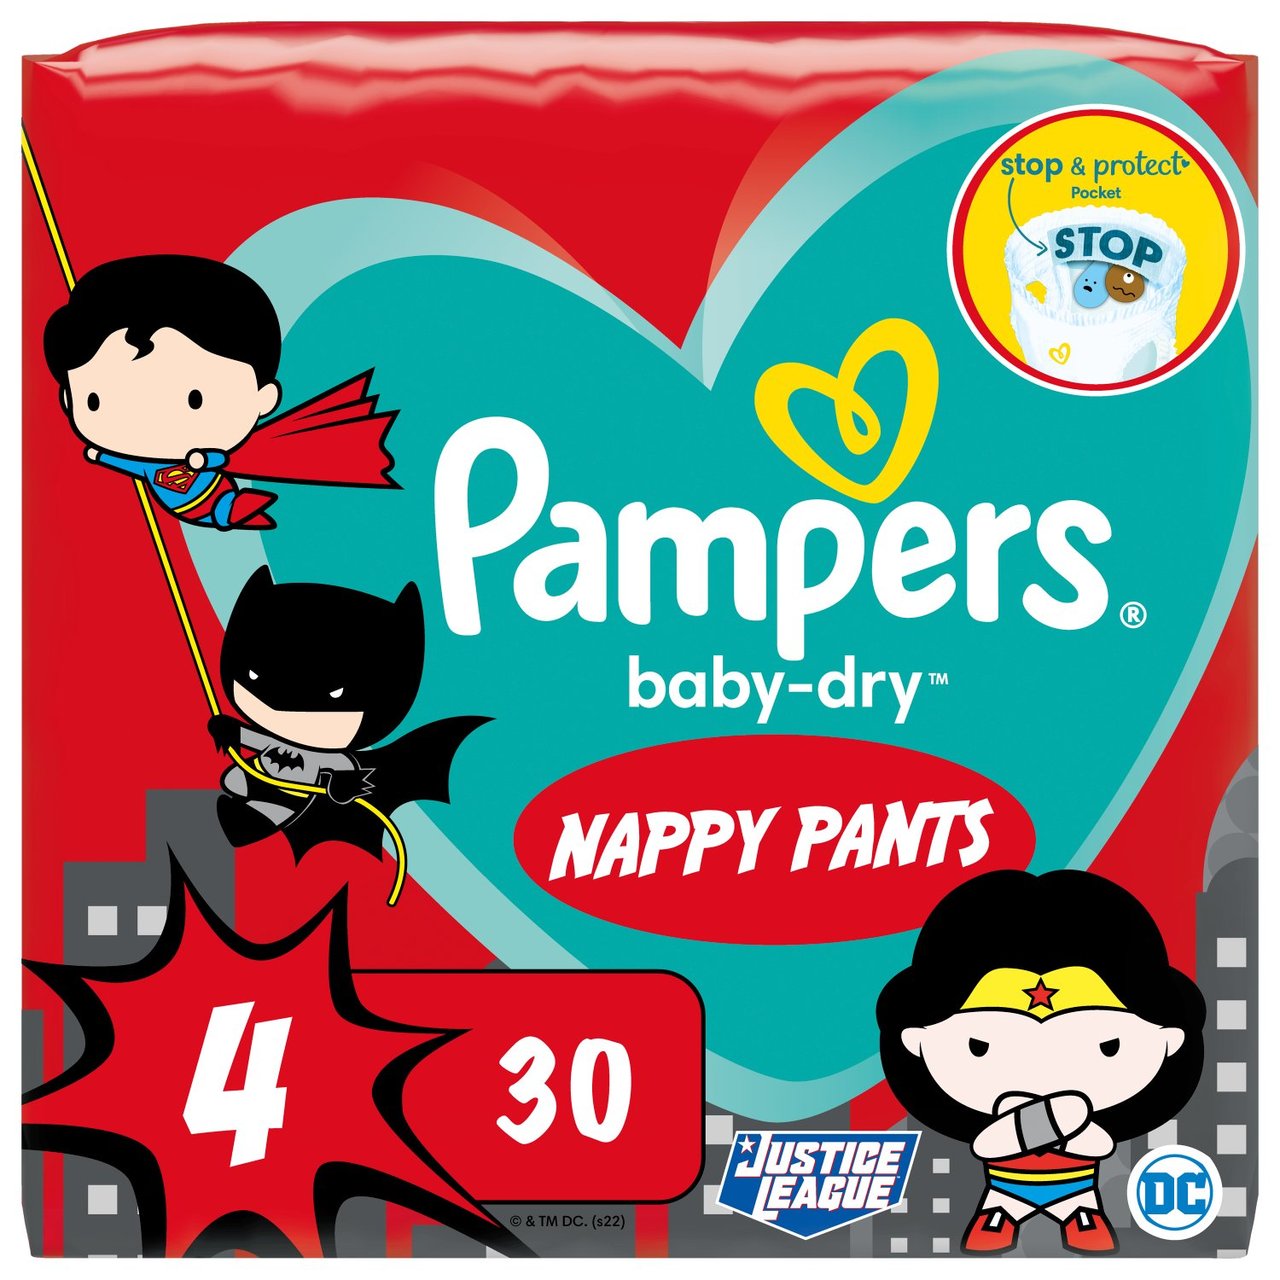 Pampers Baby-Dry Nappy Pants, Size 6 15kg+ Jumbo Pack - HelloSupermarket